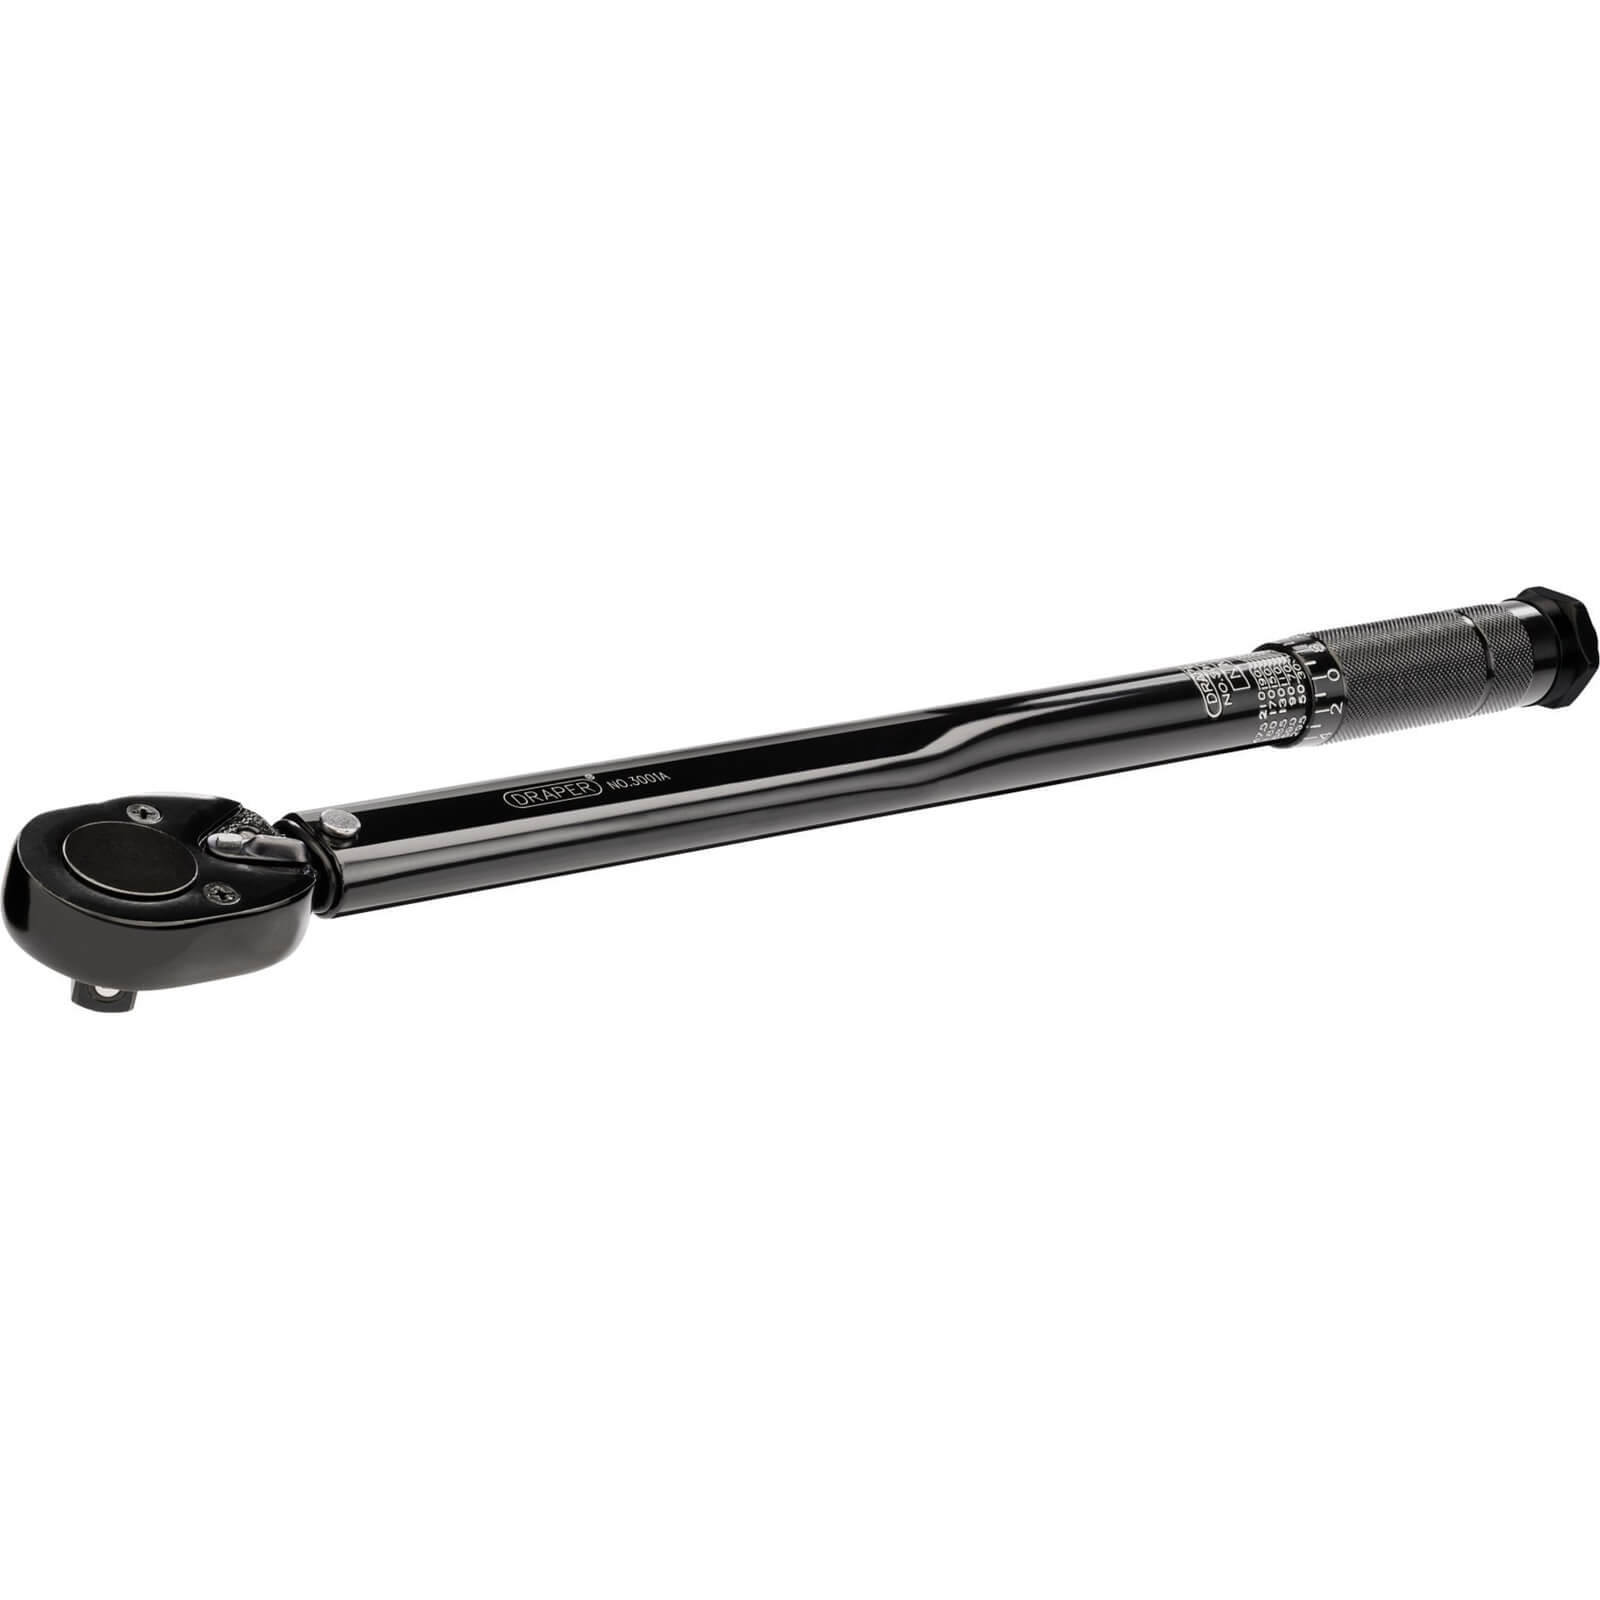 Image of Draper 3001A/BK 1/2" Square Drive Ratchet Torque Wrench 1/2" 30Nm - 210Nm